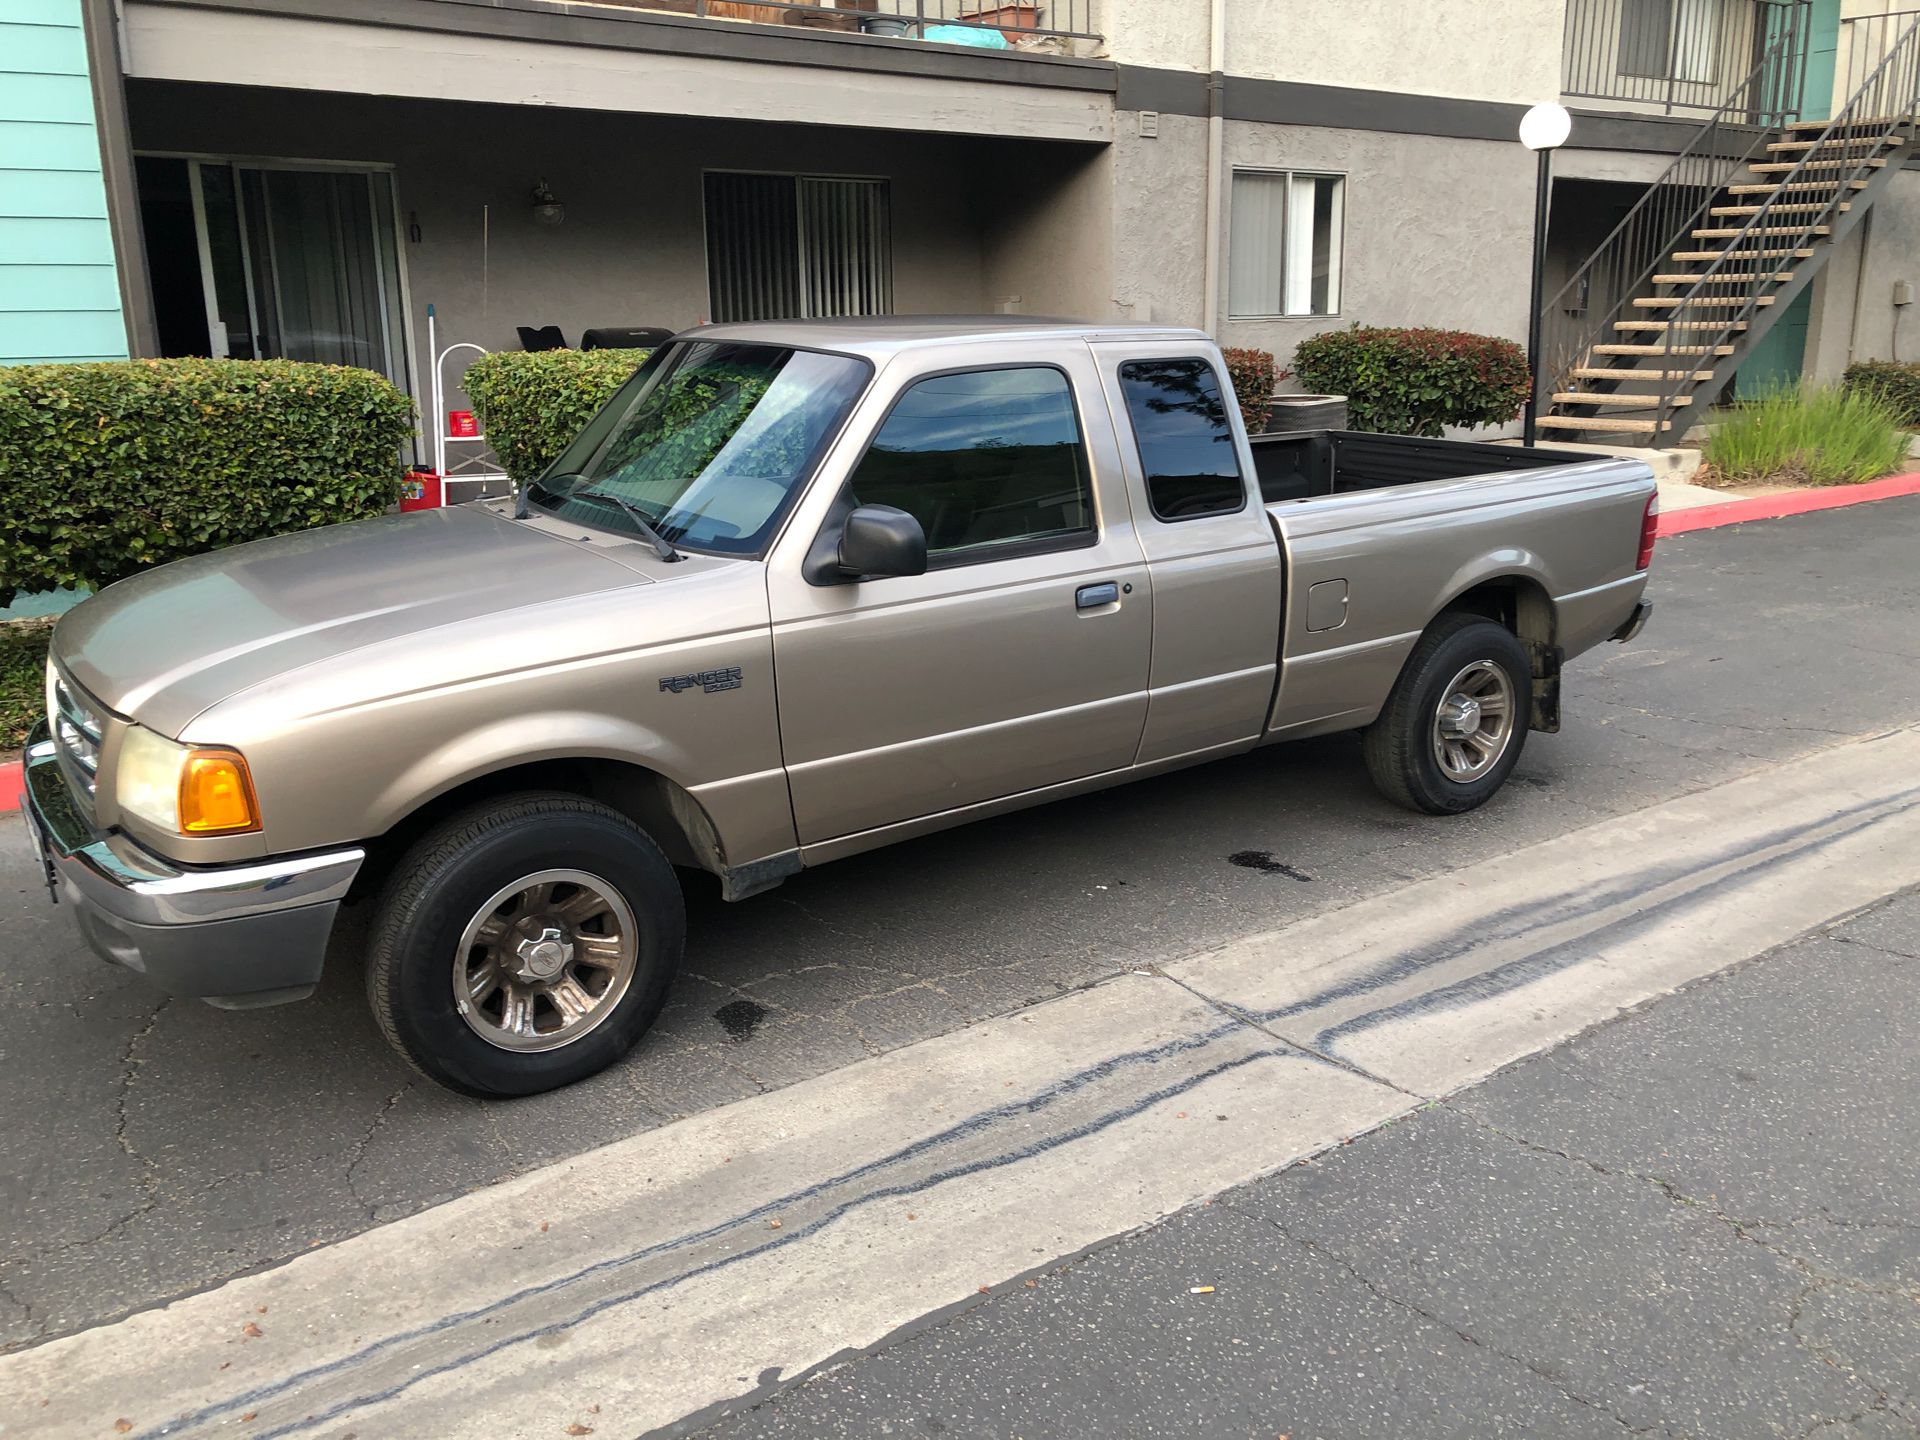 2004 Ford ranger. XLT automatic V6 power windows power locks runs and drives excellent one owner Clean title all original tow package. Ice cold A